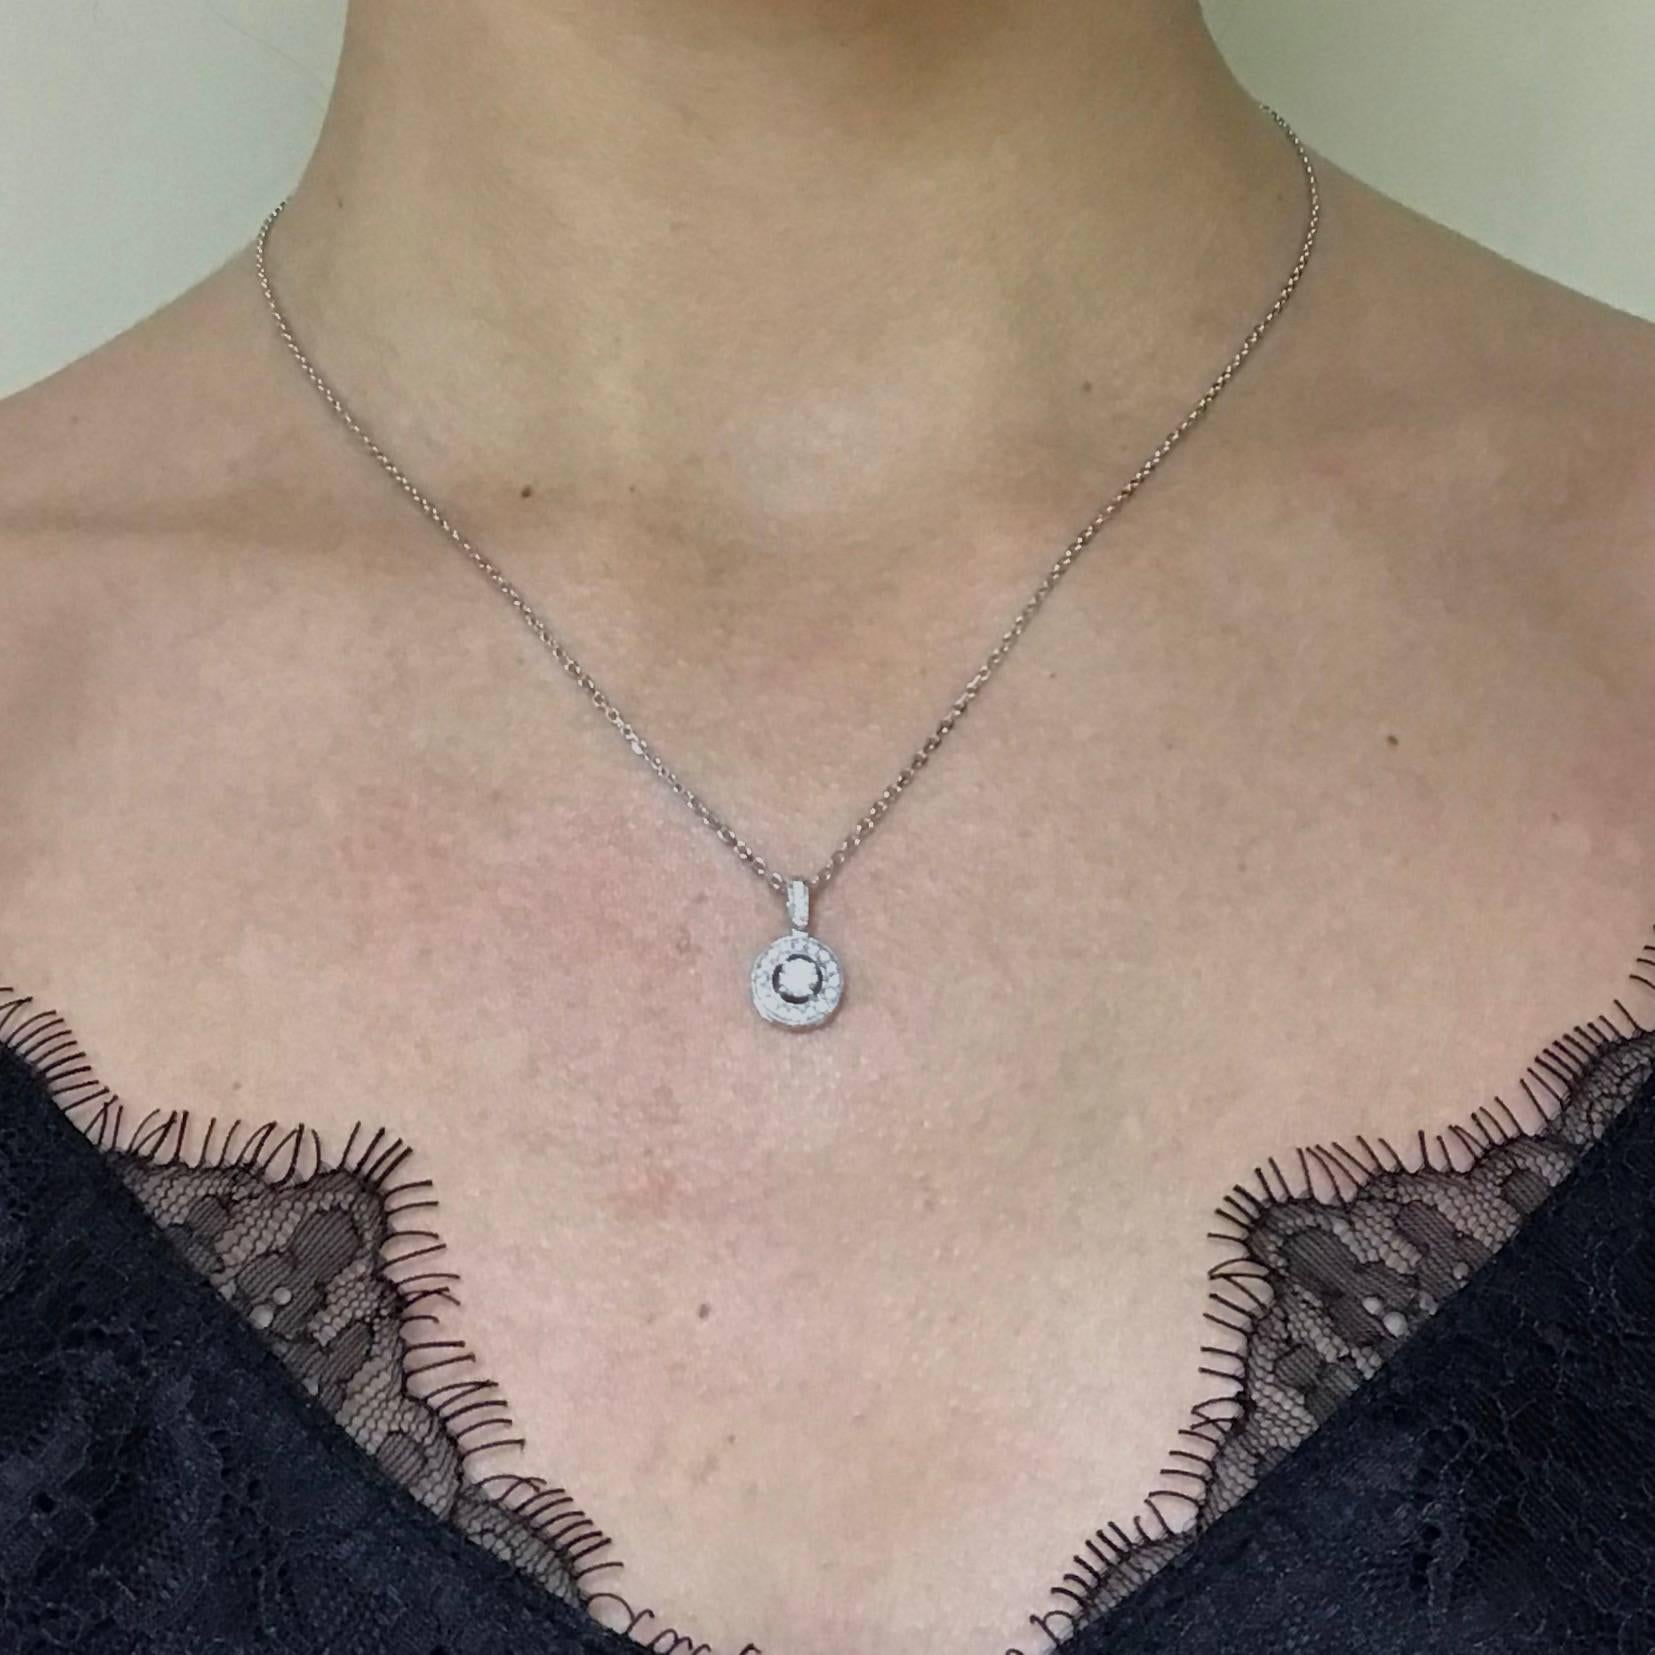 Chain Pendant Necklace White Diamonds White Gold 18 Karat In New Condition For Sale In Vannes, FR